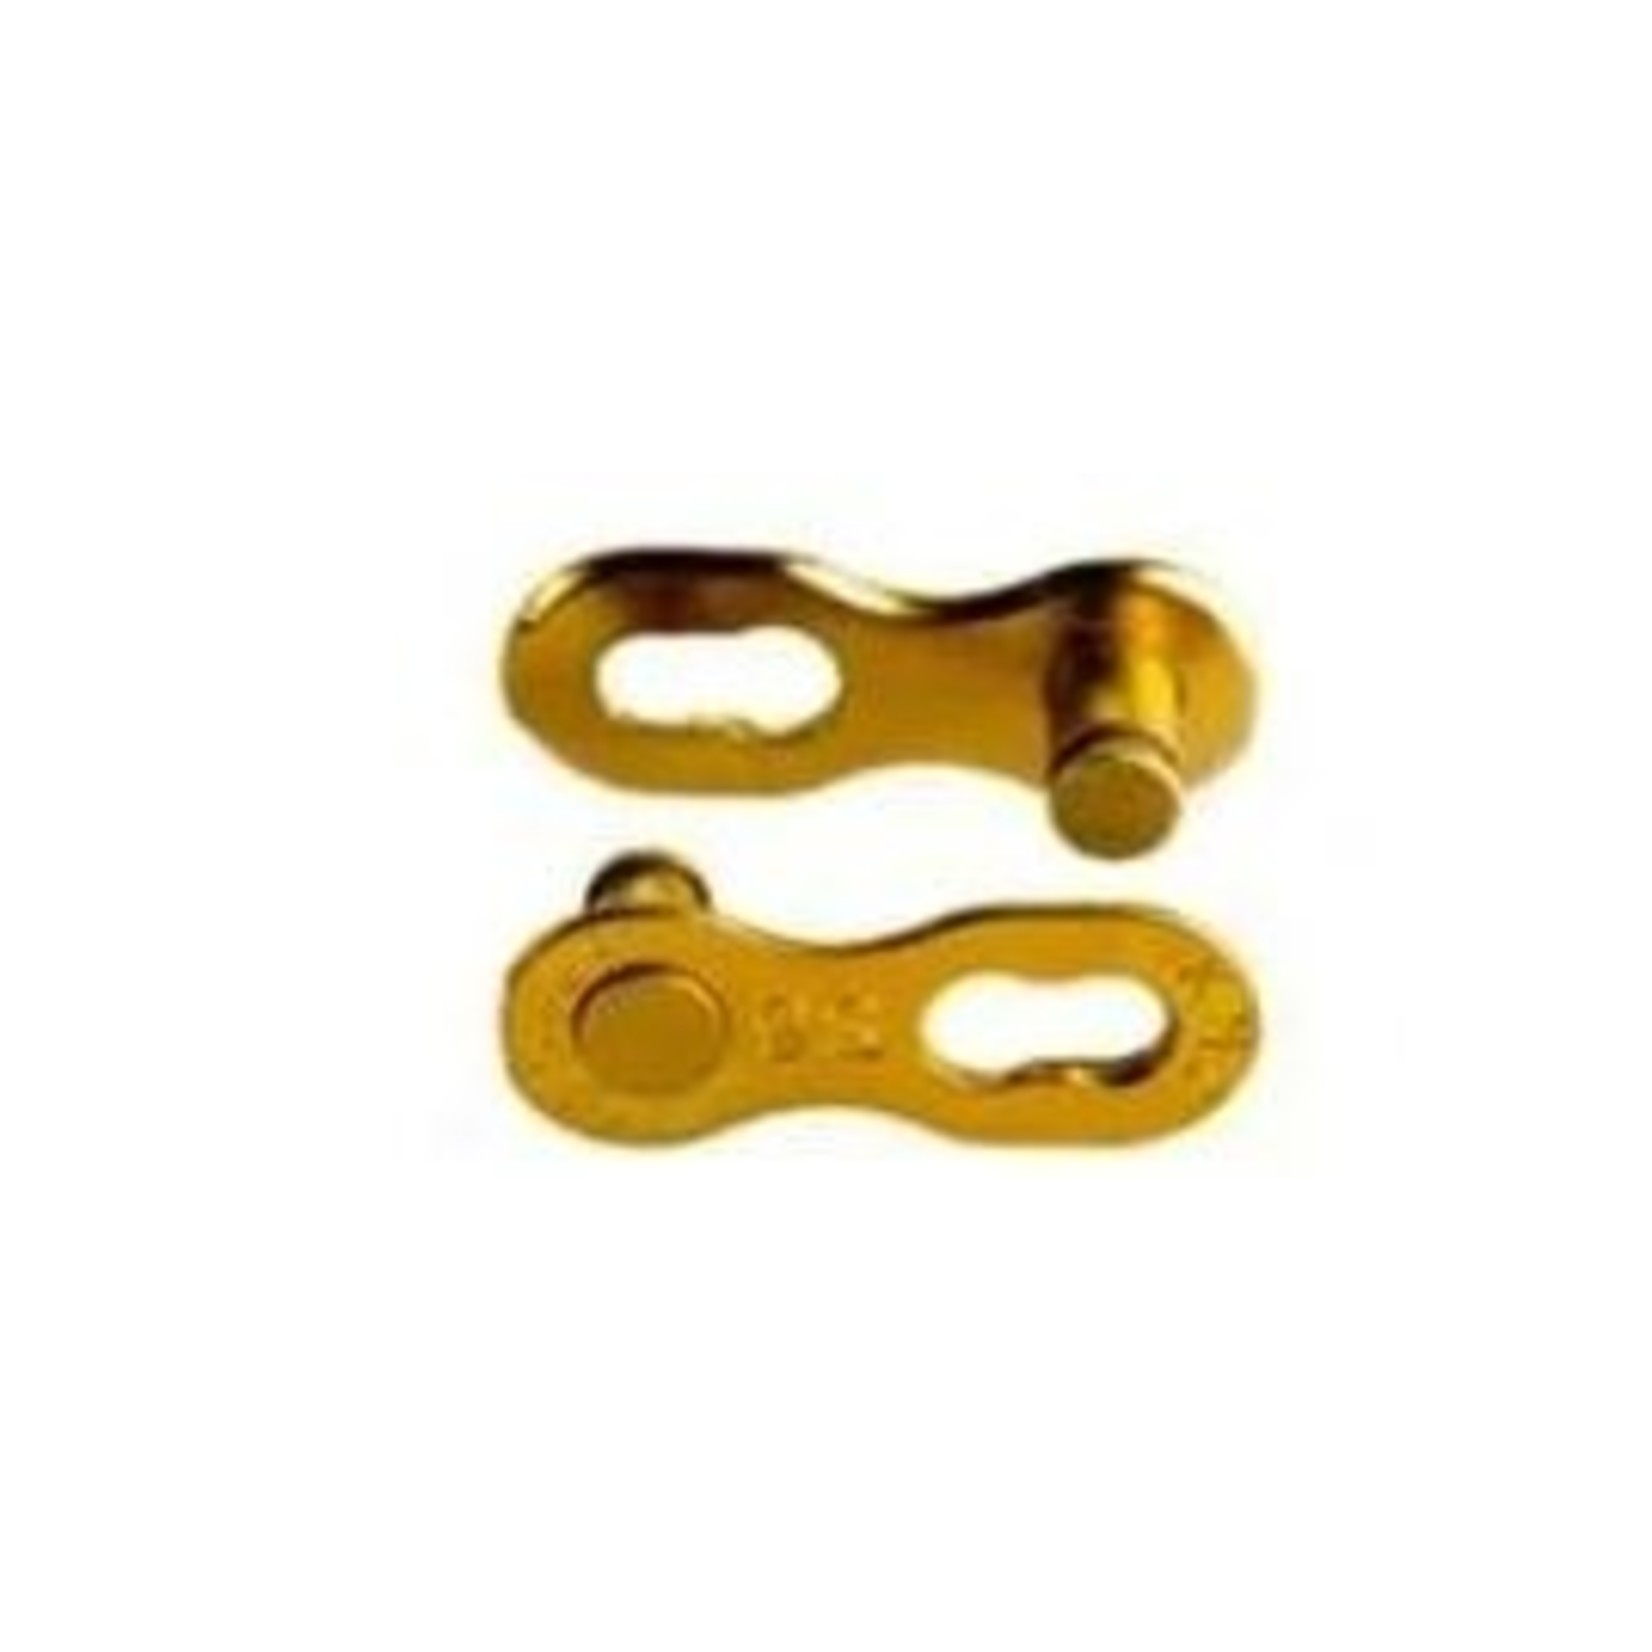 KMC KMC Bike Connecting Chain Links - 9 Speed - 1/2" X 11/128"- Card of 2 - Ti Gold